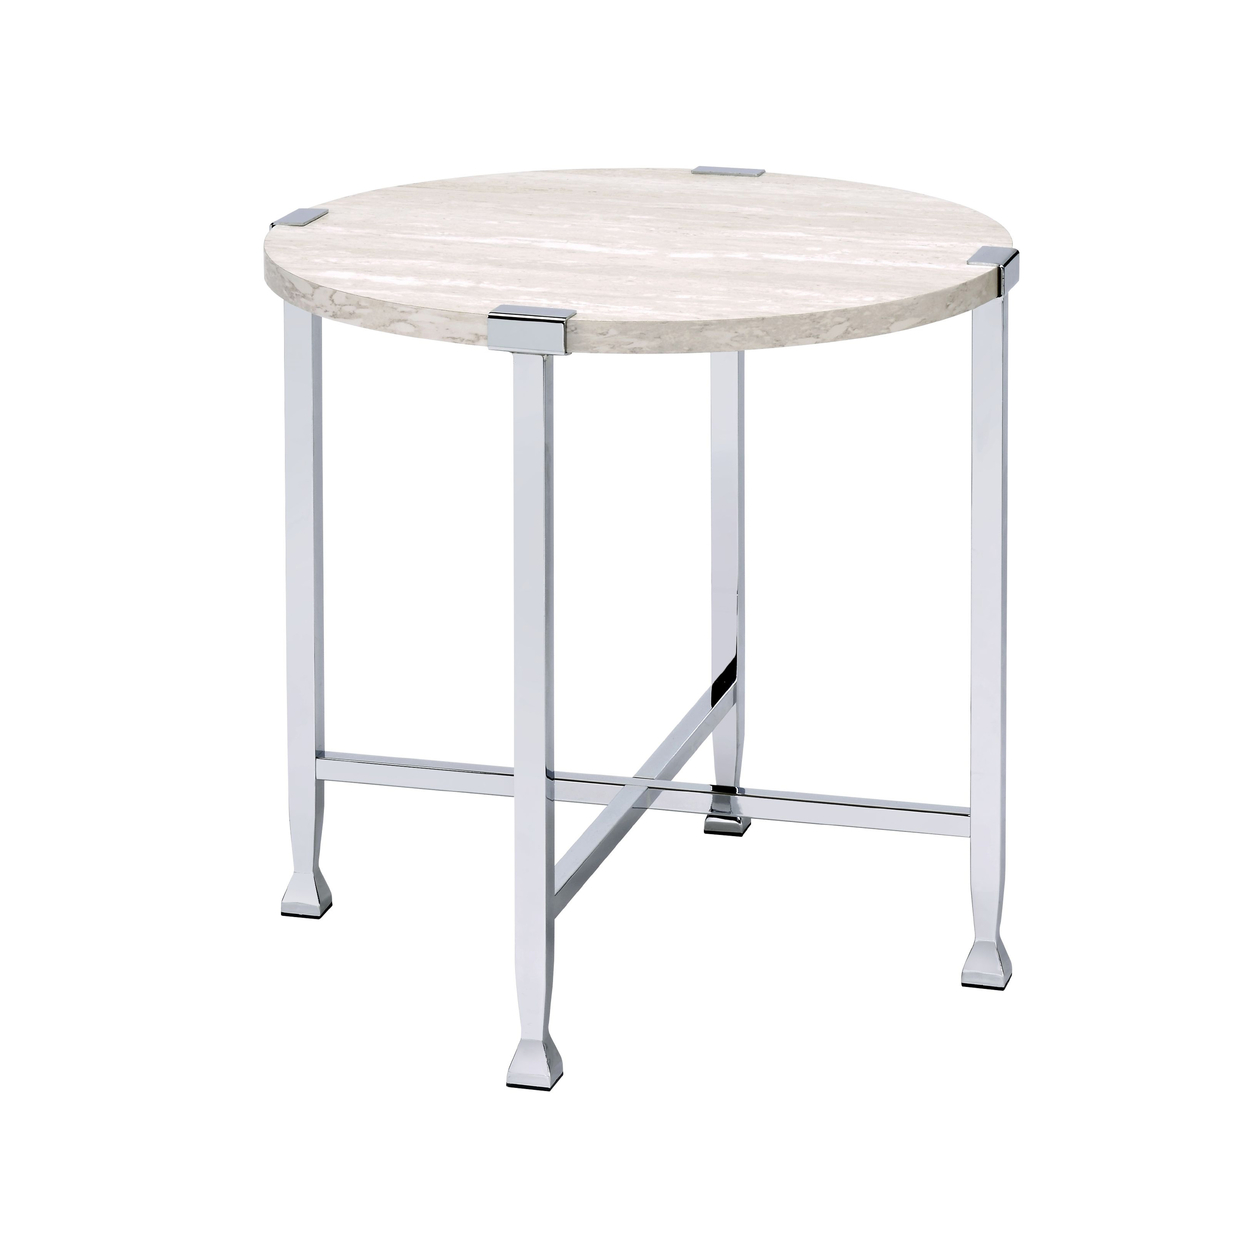 End Table With X Shaped Metal Base And Round Wooden Top,Silver And Beige- Saltoro Sherpi